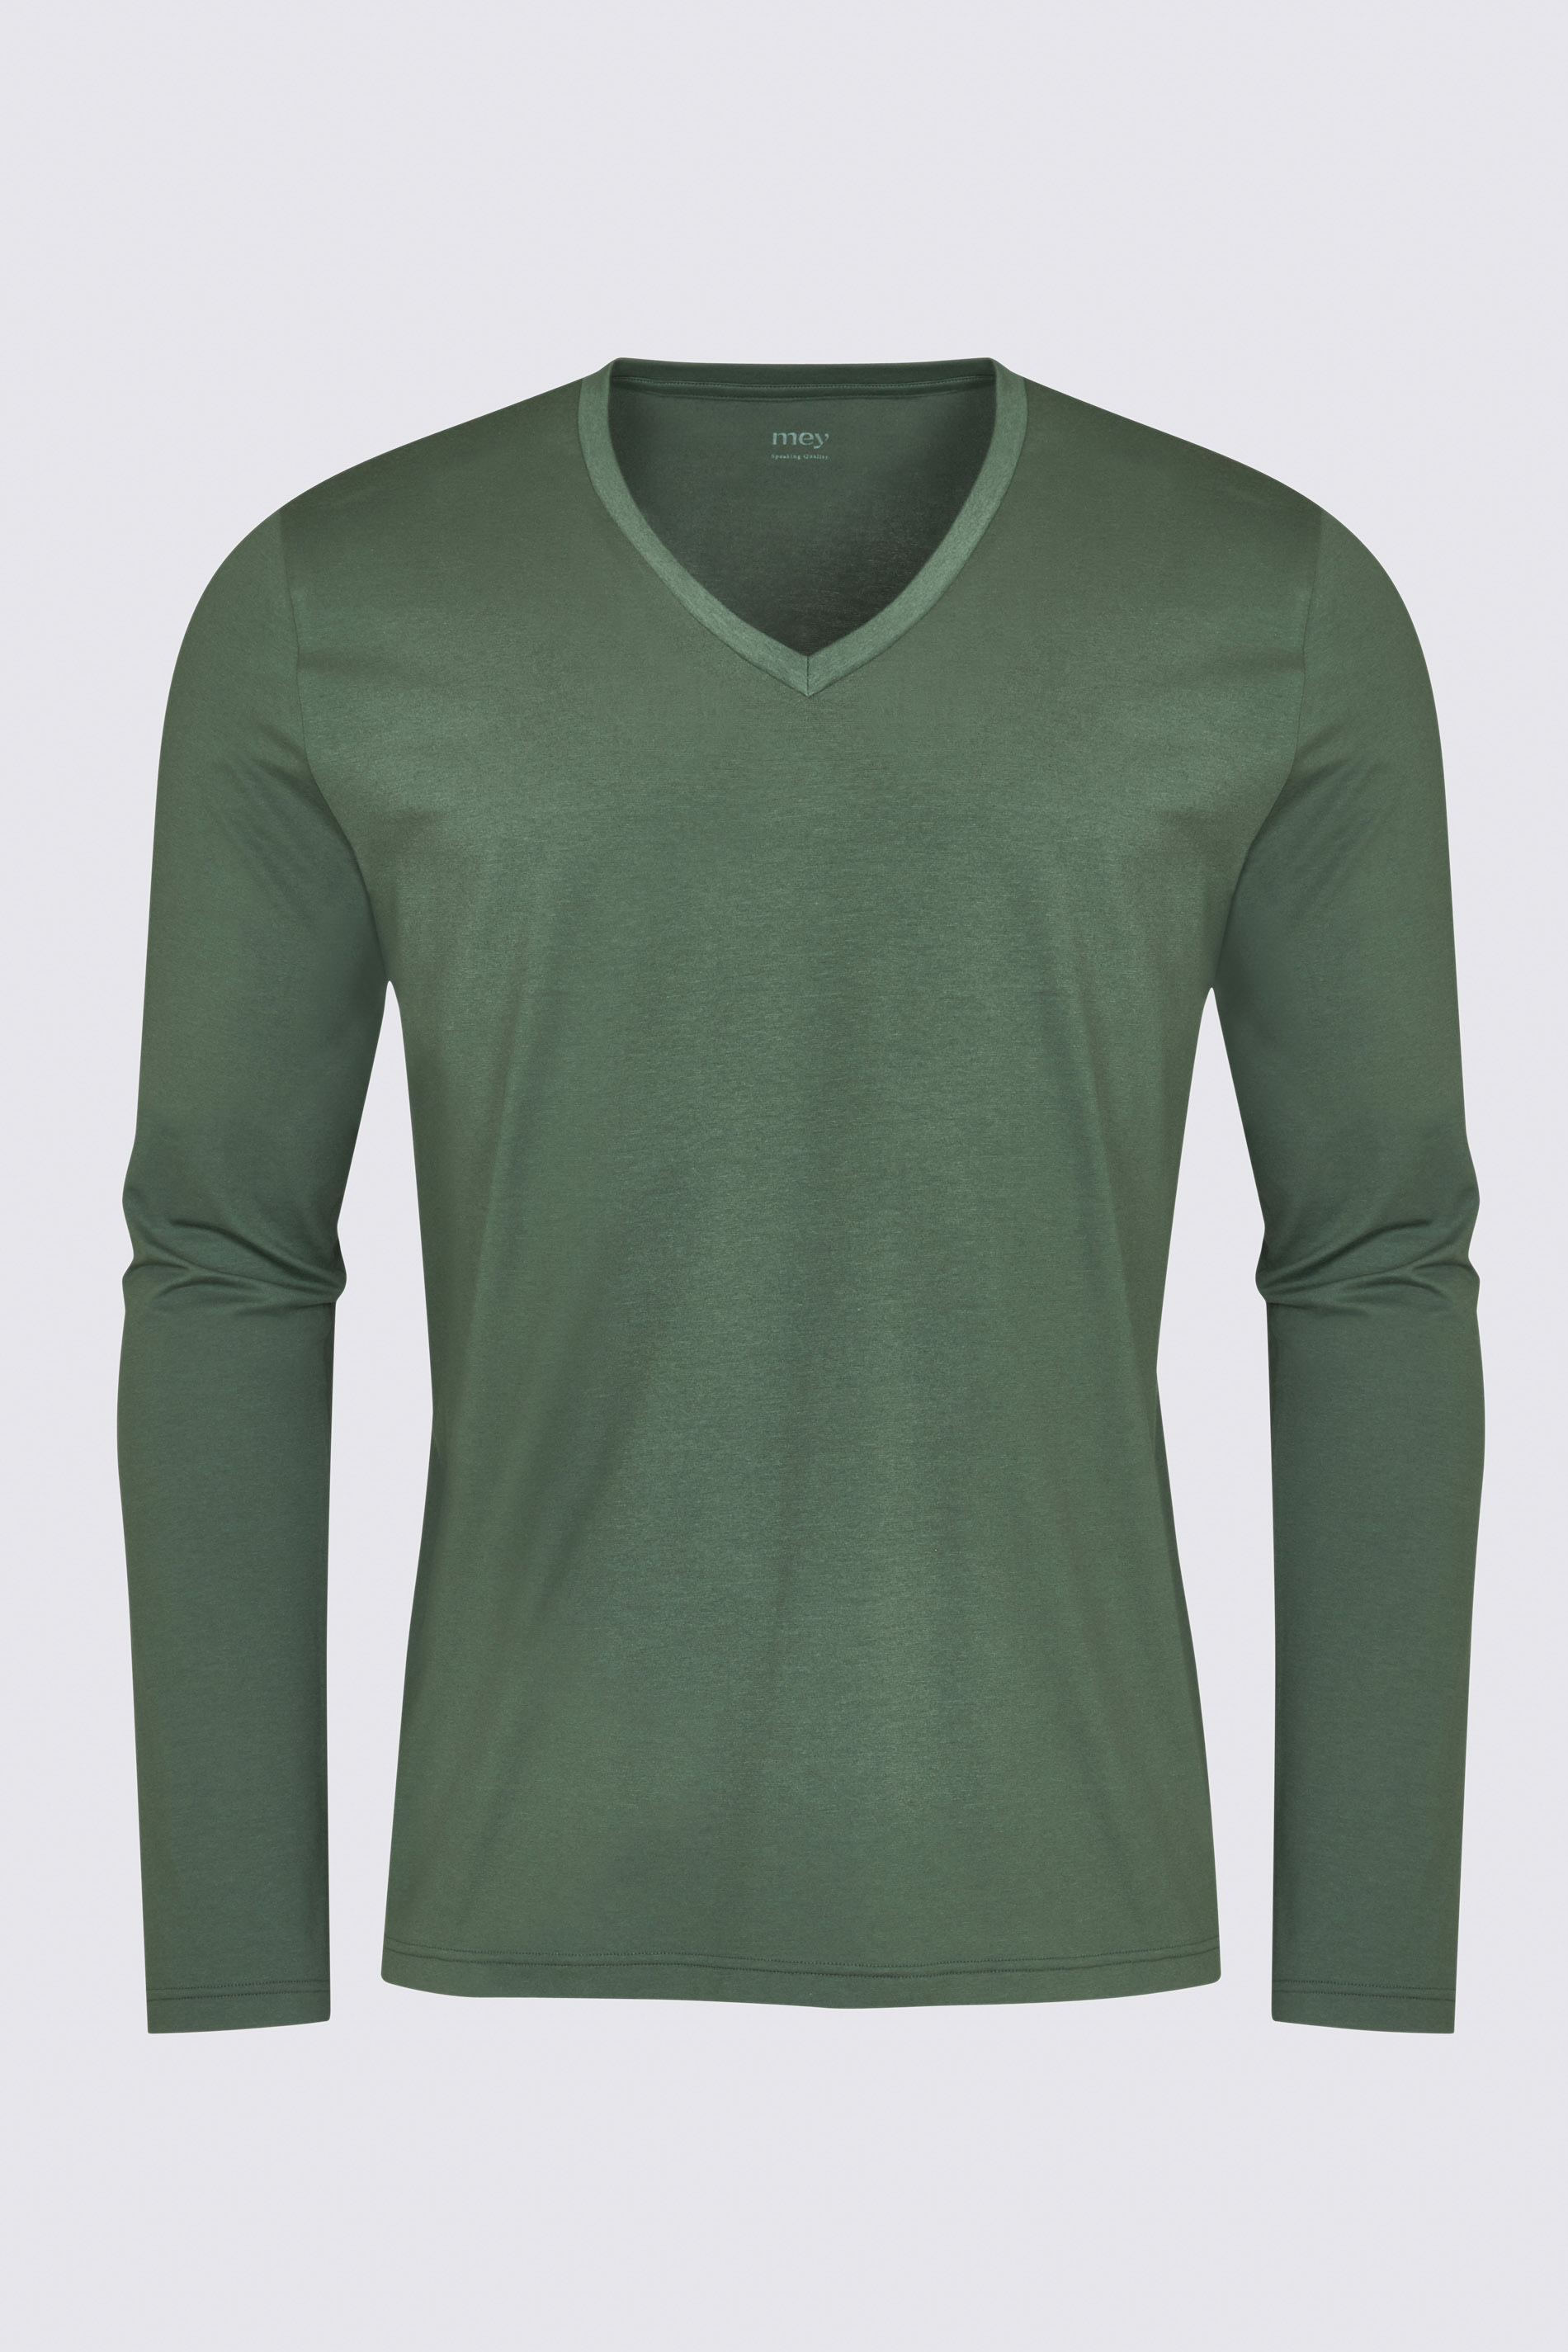 Long sleeves Evergreen Dry Cotton Colour Cut Out | mey®